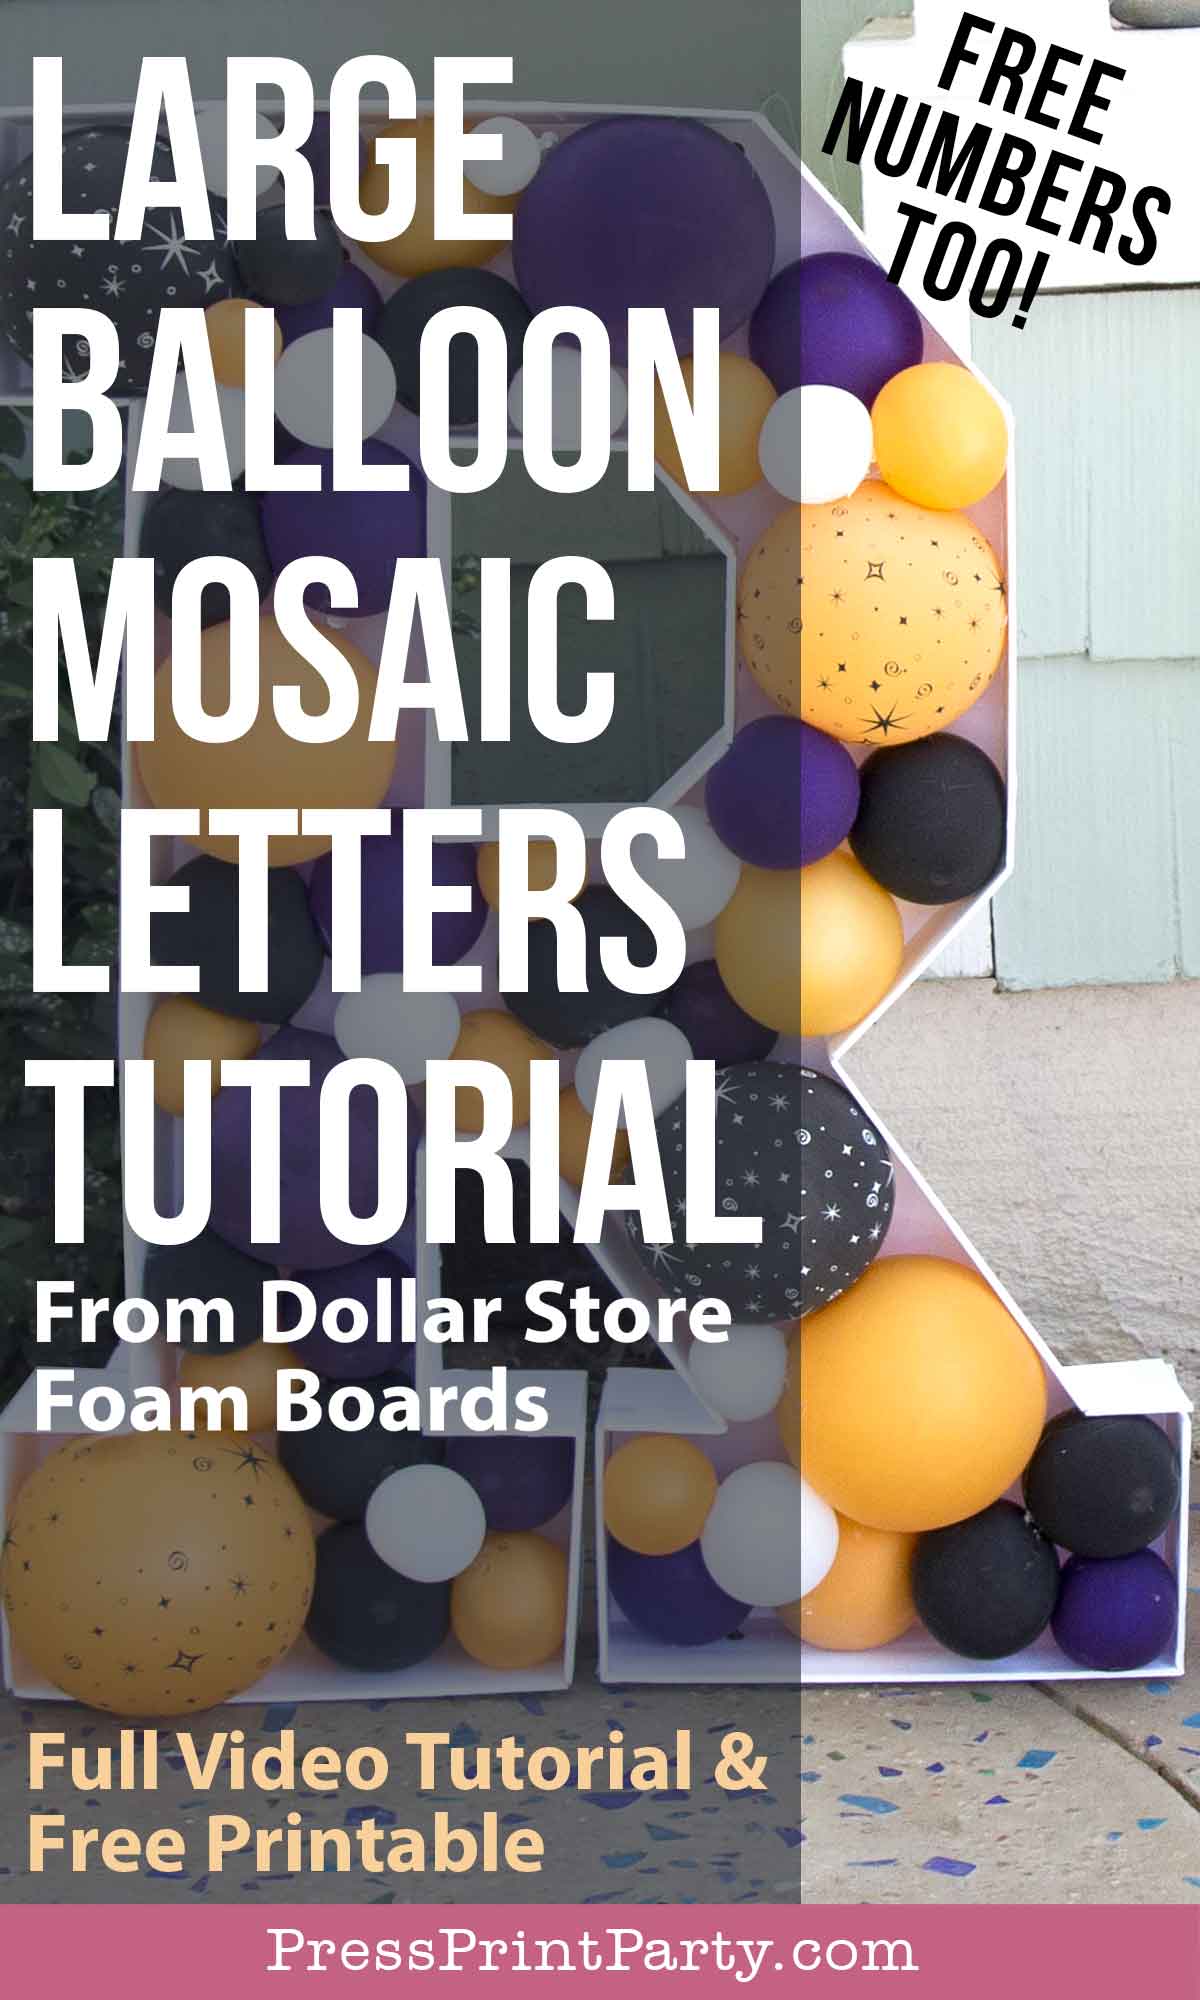 R letter - balloon mosaic letters or numbers tutorial from dollar store foam boards - Press Print Party!